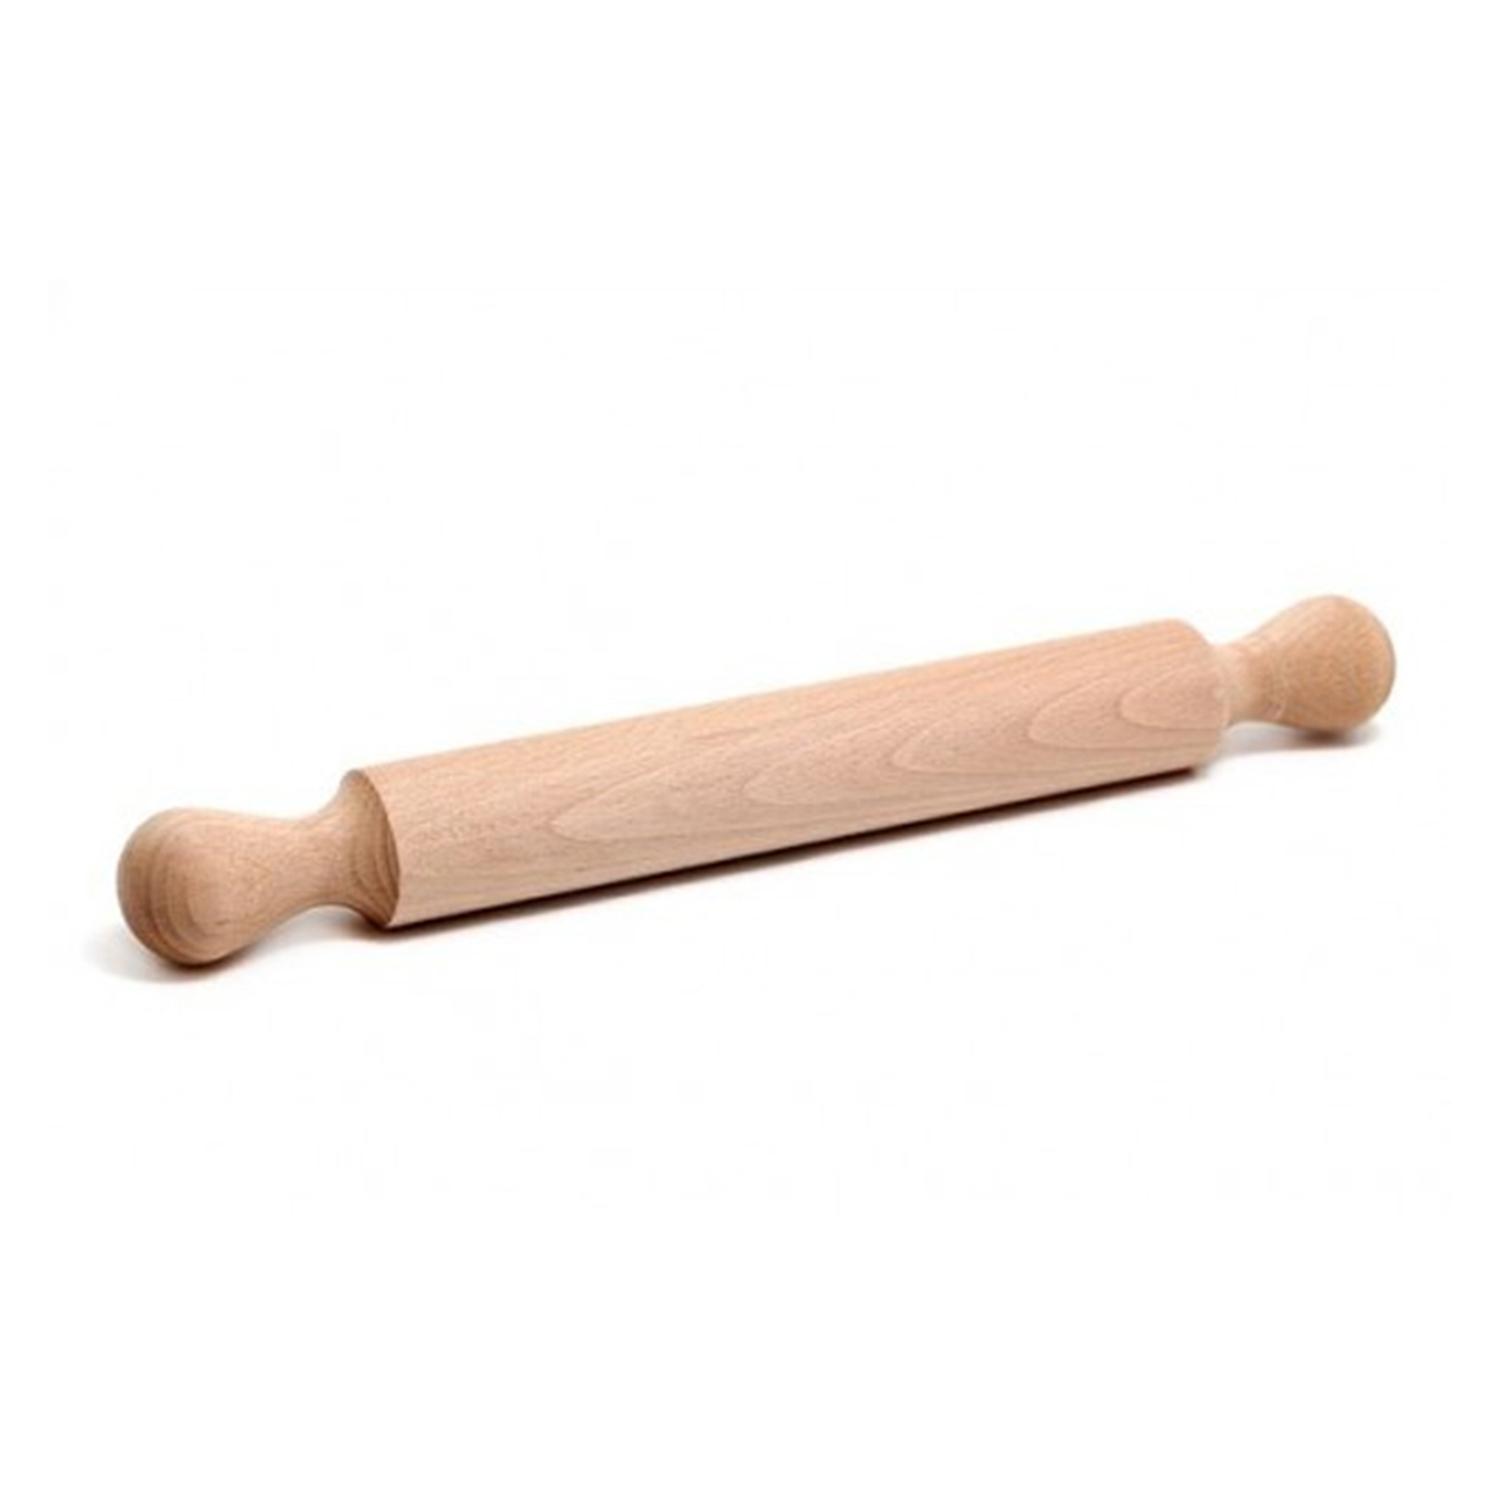 1.5X1.5X14 INCHES WOODEN ROLLING PIN PLAIN